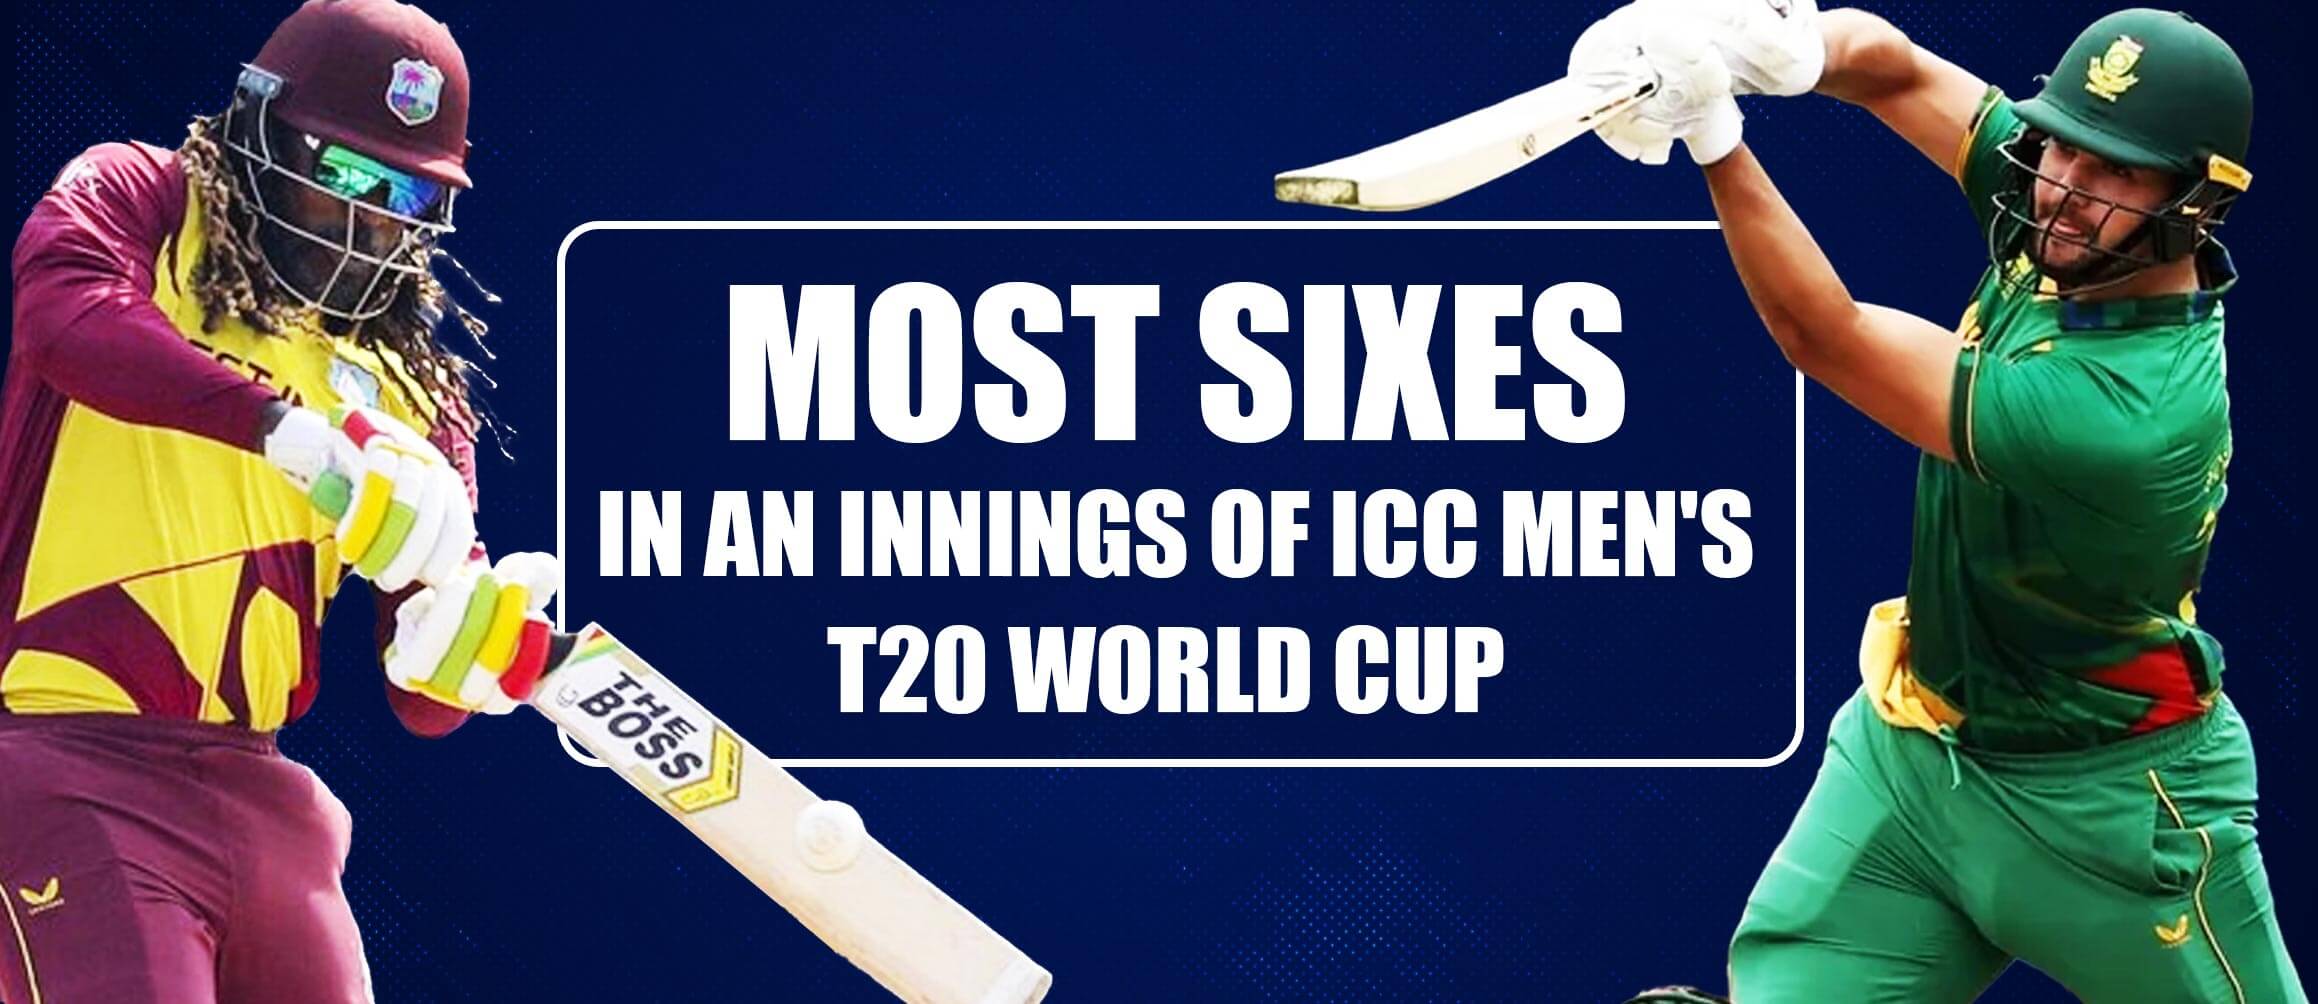 Most sixes in an innings of ICC Men’s T20 World Cup